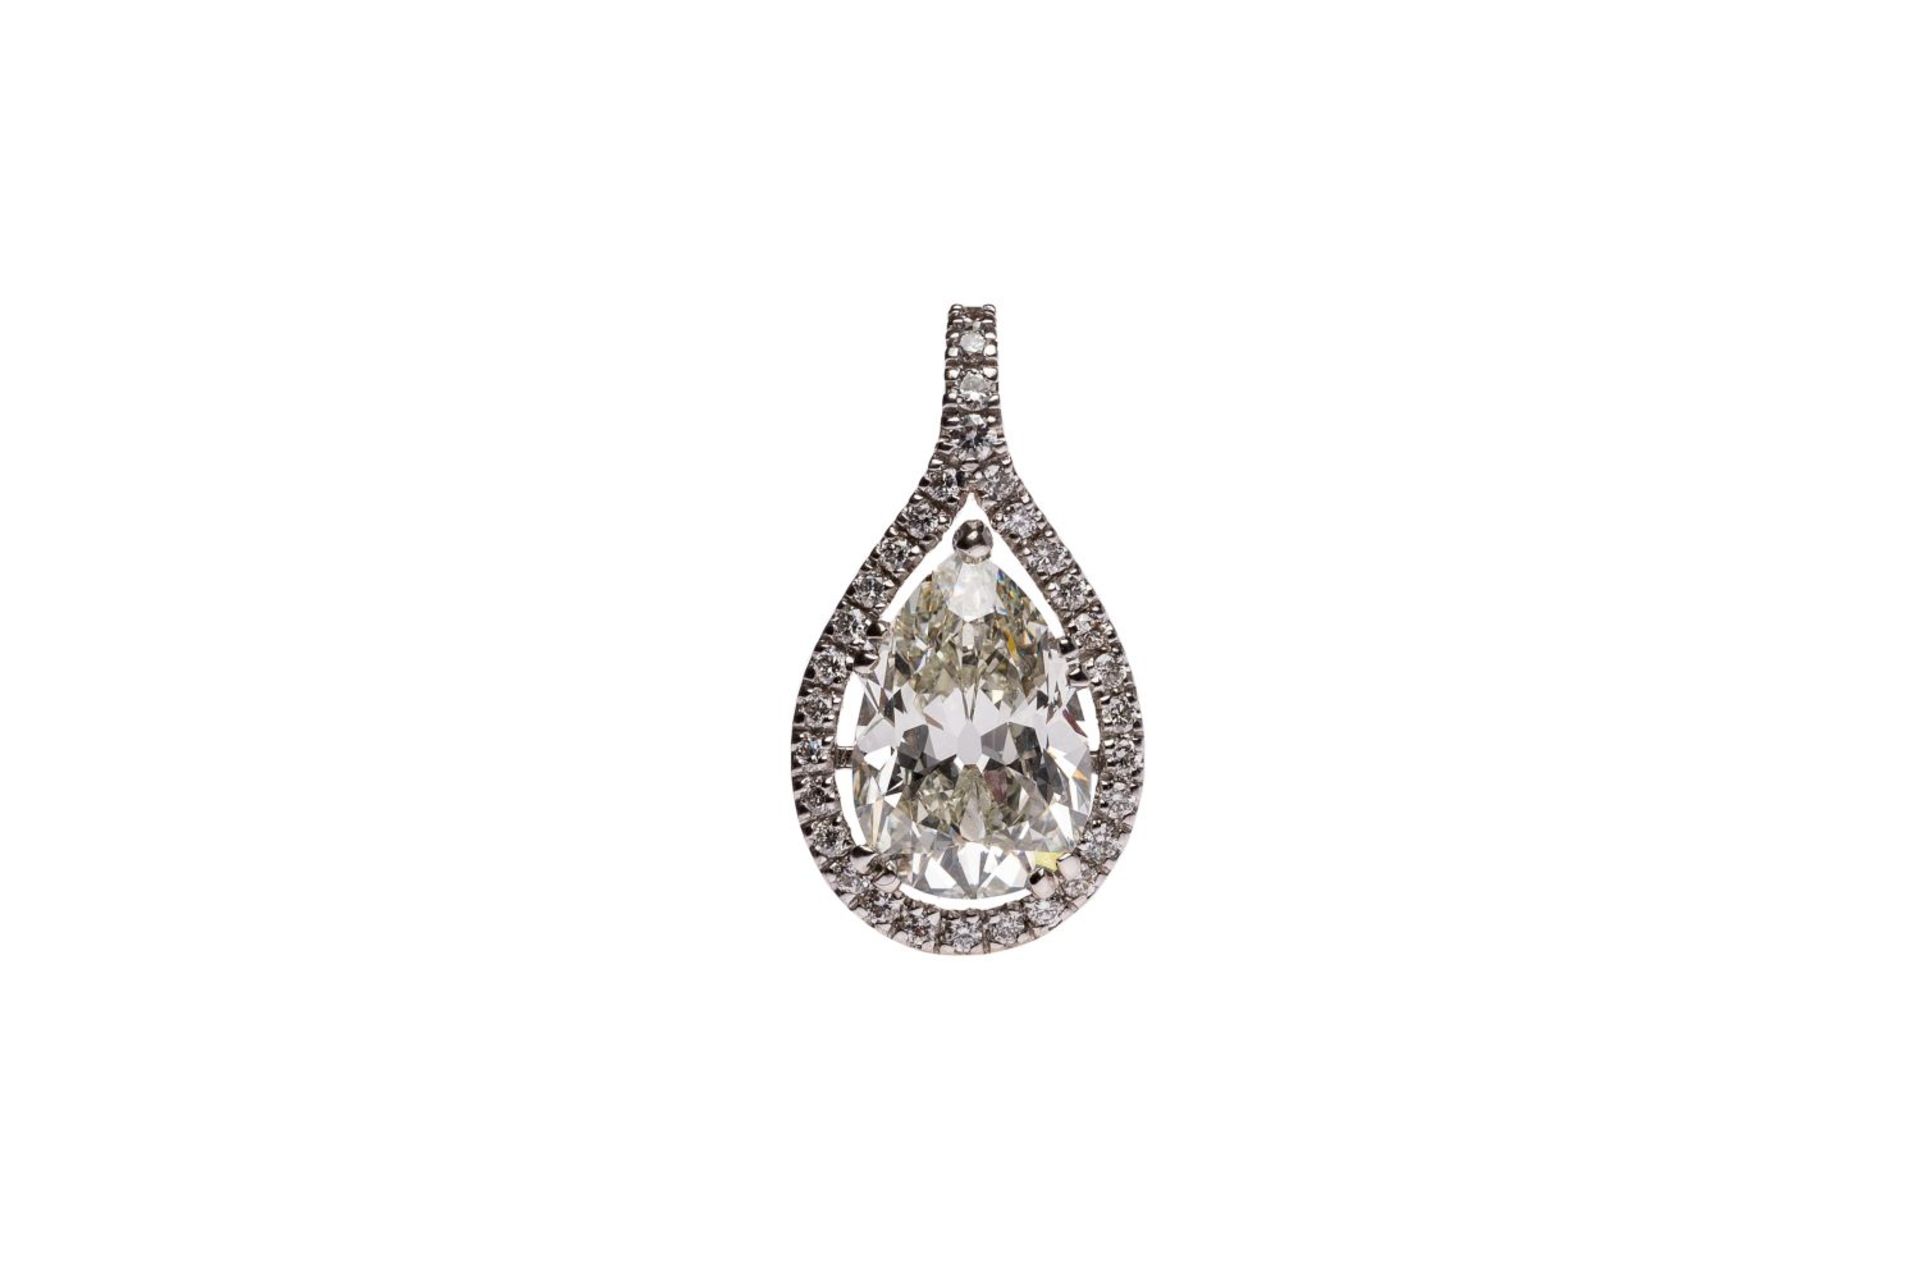 Diamond pendant18kt white gold Pendant with a drop-cut diamond approx. 3 ct, and brilliants total